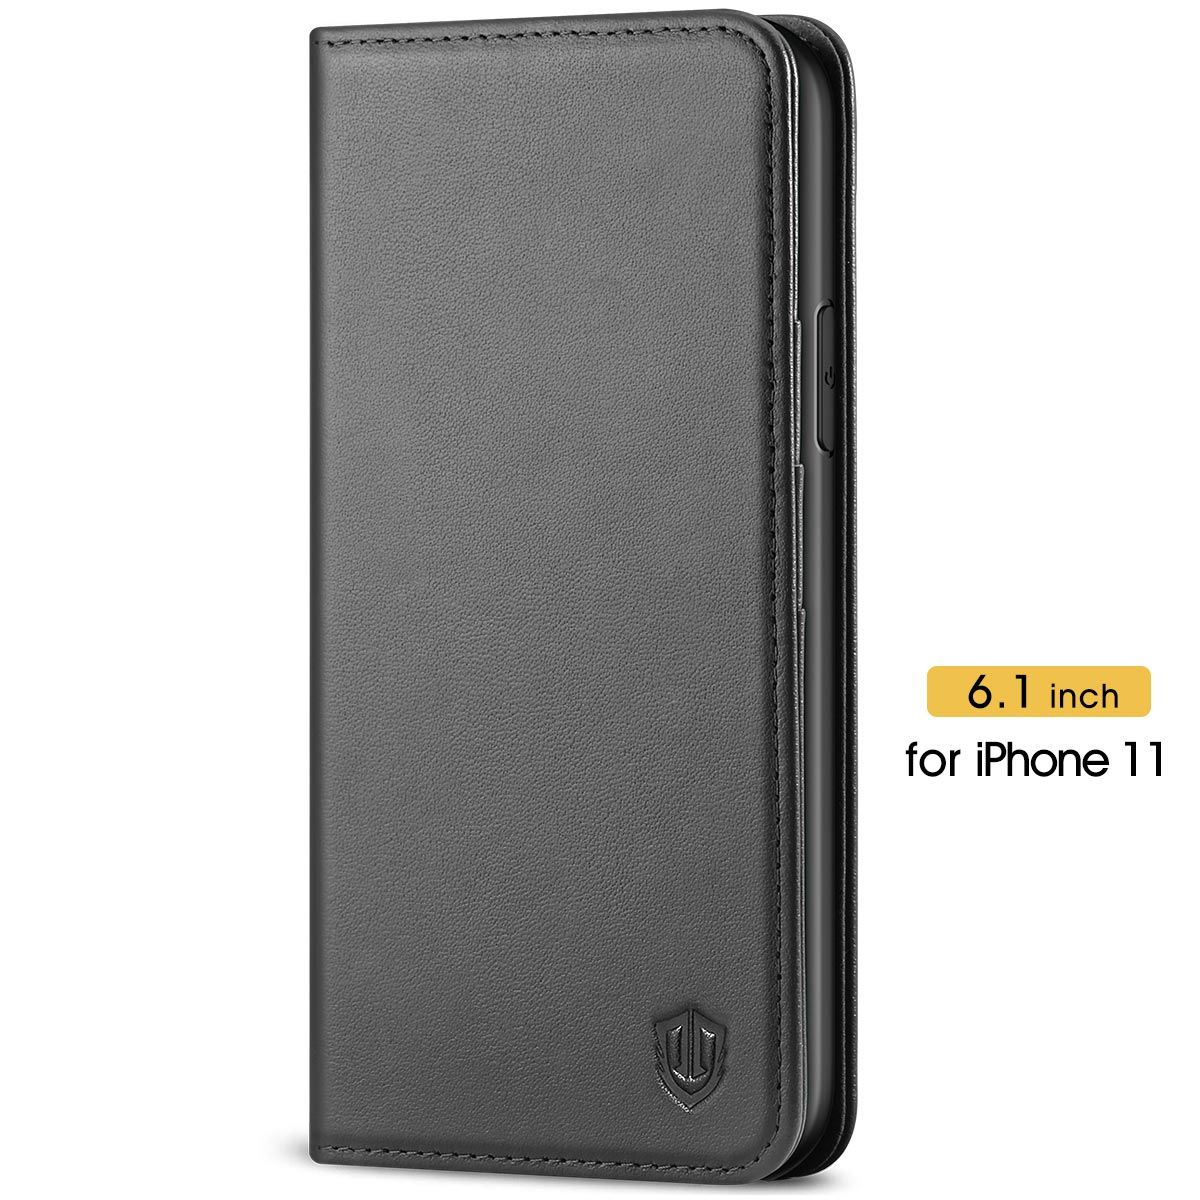 SHIELDON iPhone 14 Pro Max Wallet Case, iPhone 14 Pro Max Genuine Leather  Cover with RFID Blocking, Book Folio Flip Kickstand, Magnetic Closure for iPhone  14 Pro Max 6.7-inch 5G